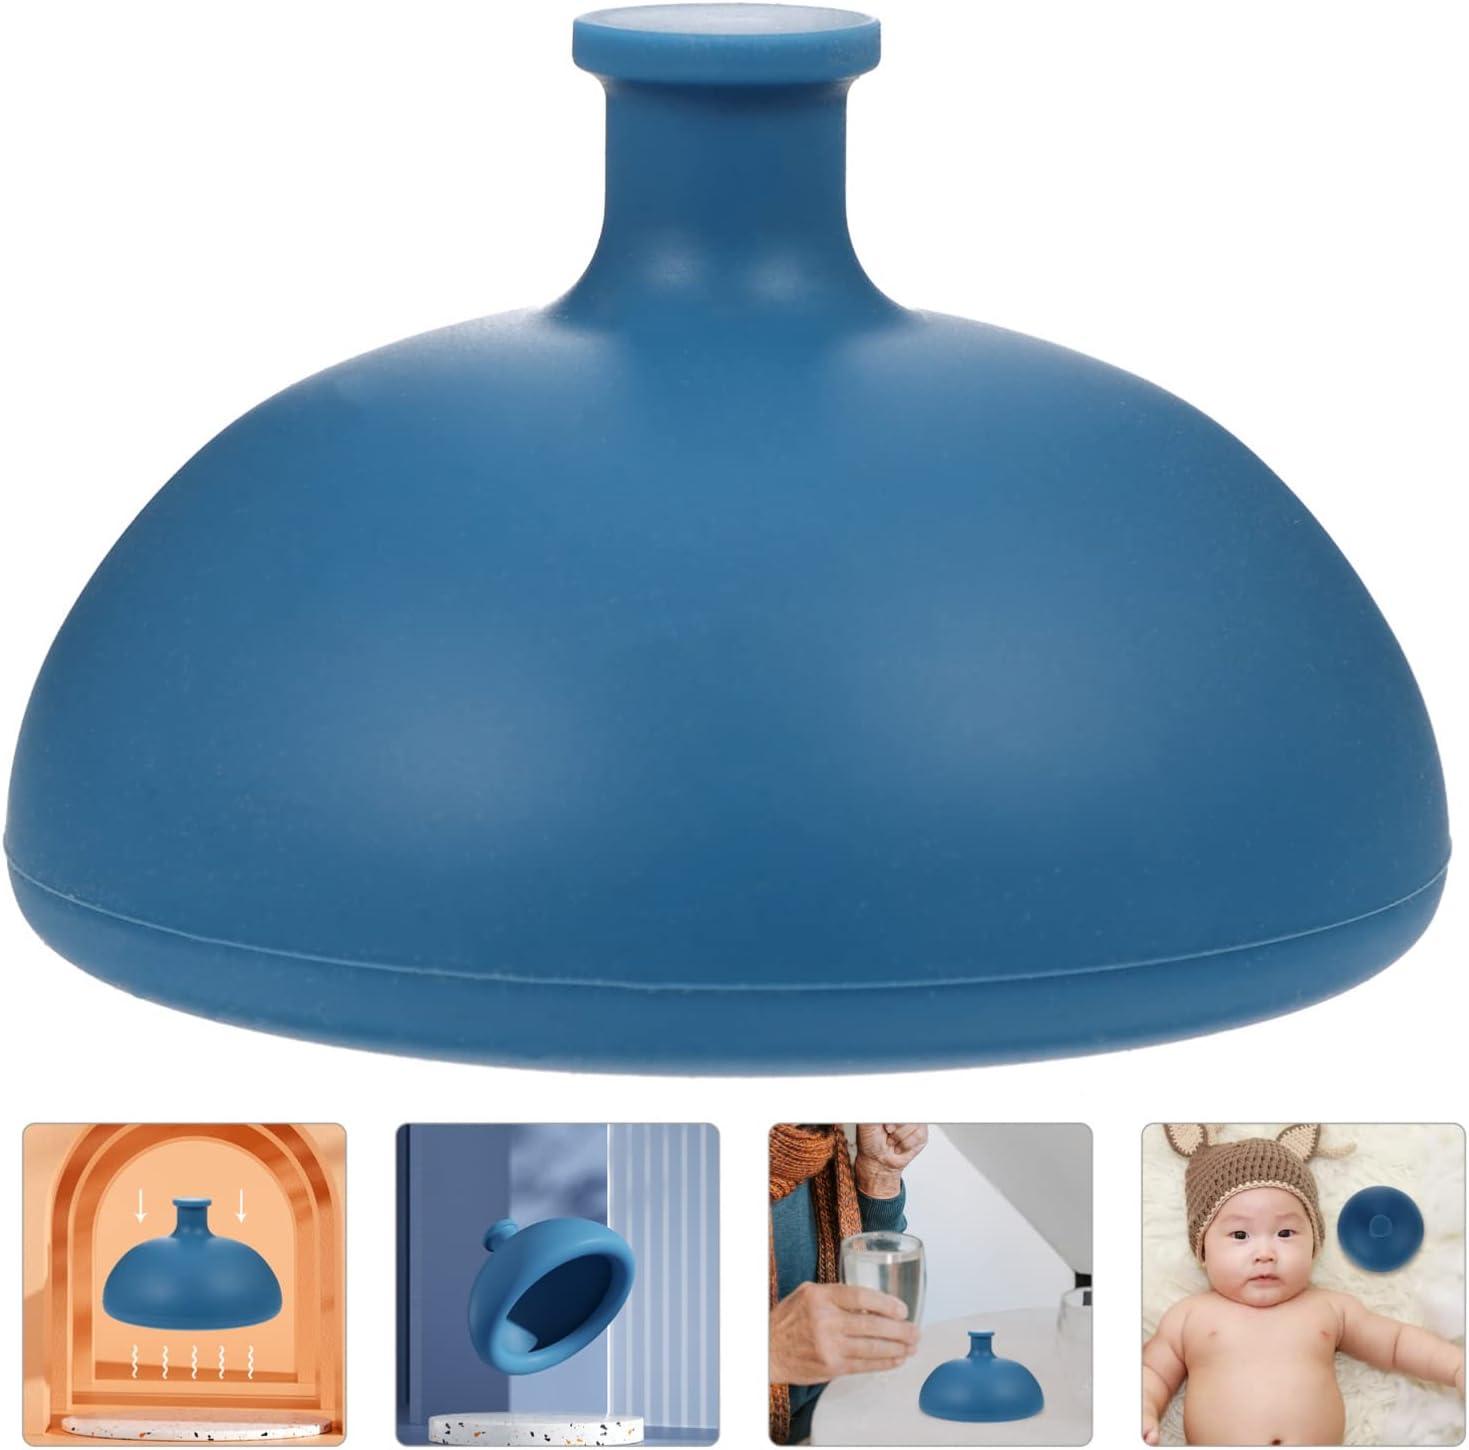 Chest Percussion Cup - Chest Physical Therapy Aids(CPT), Helps to Break up  Mucus by Percussion and Postural Drainage, Professional Palm Sputum Remover